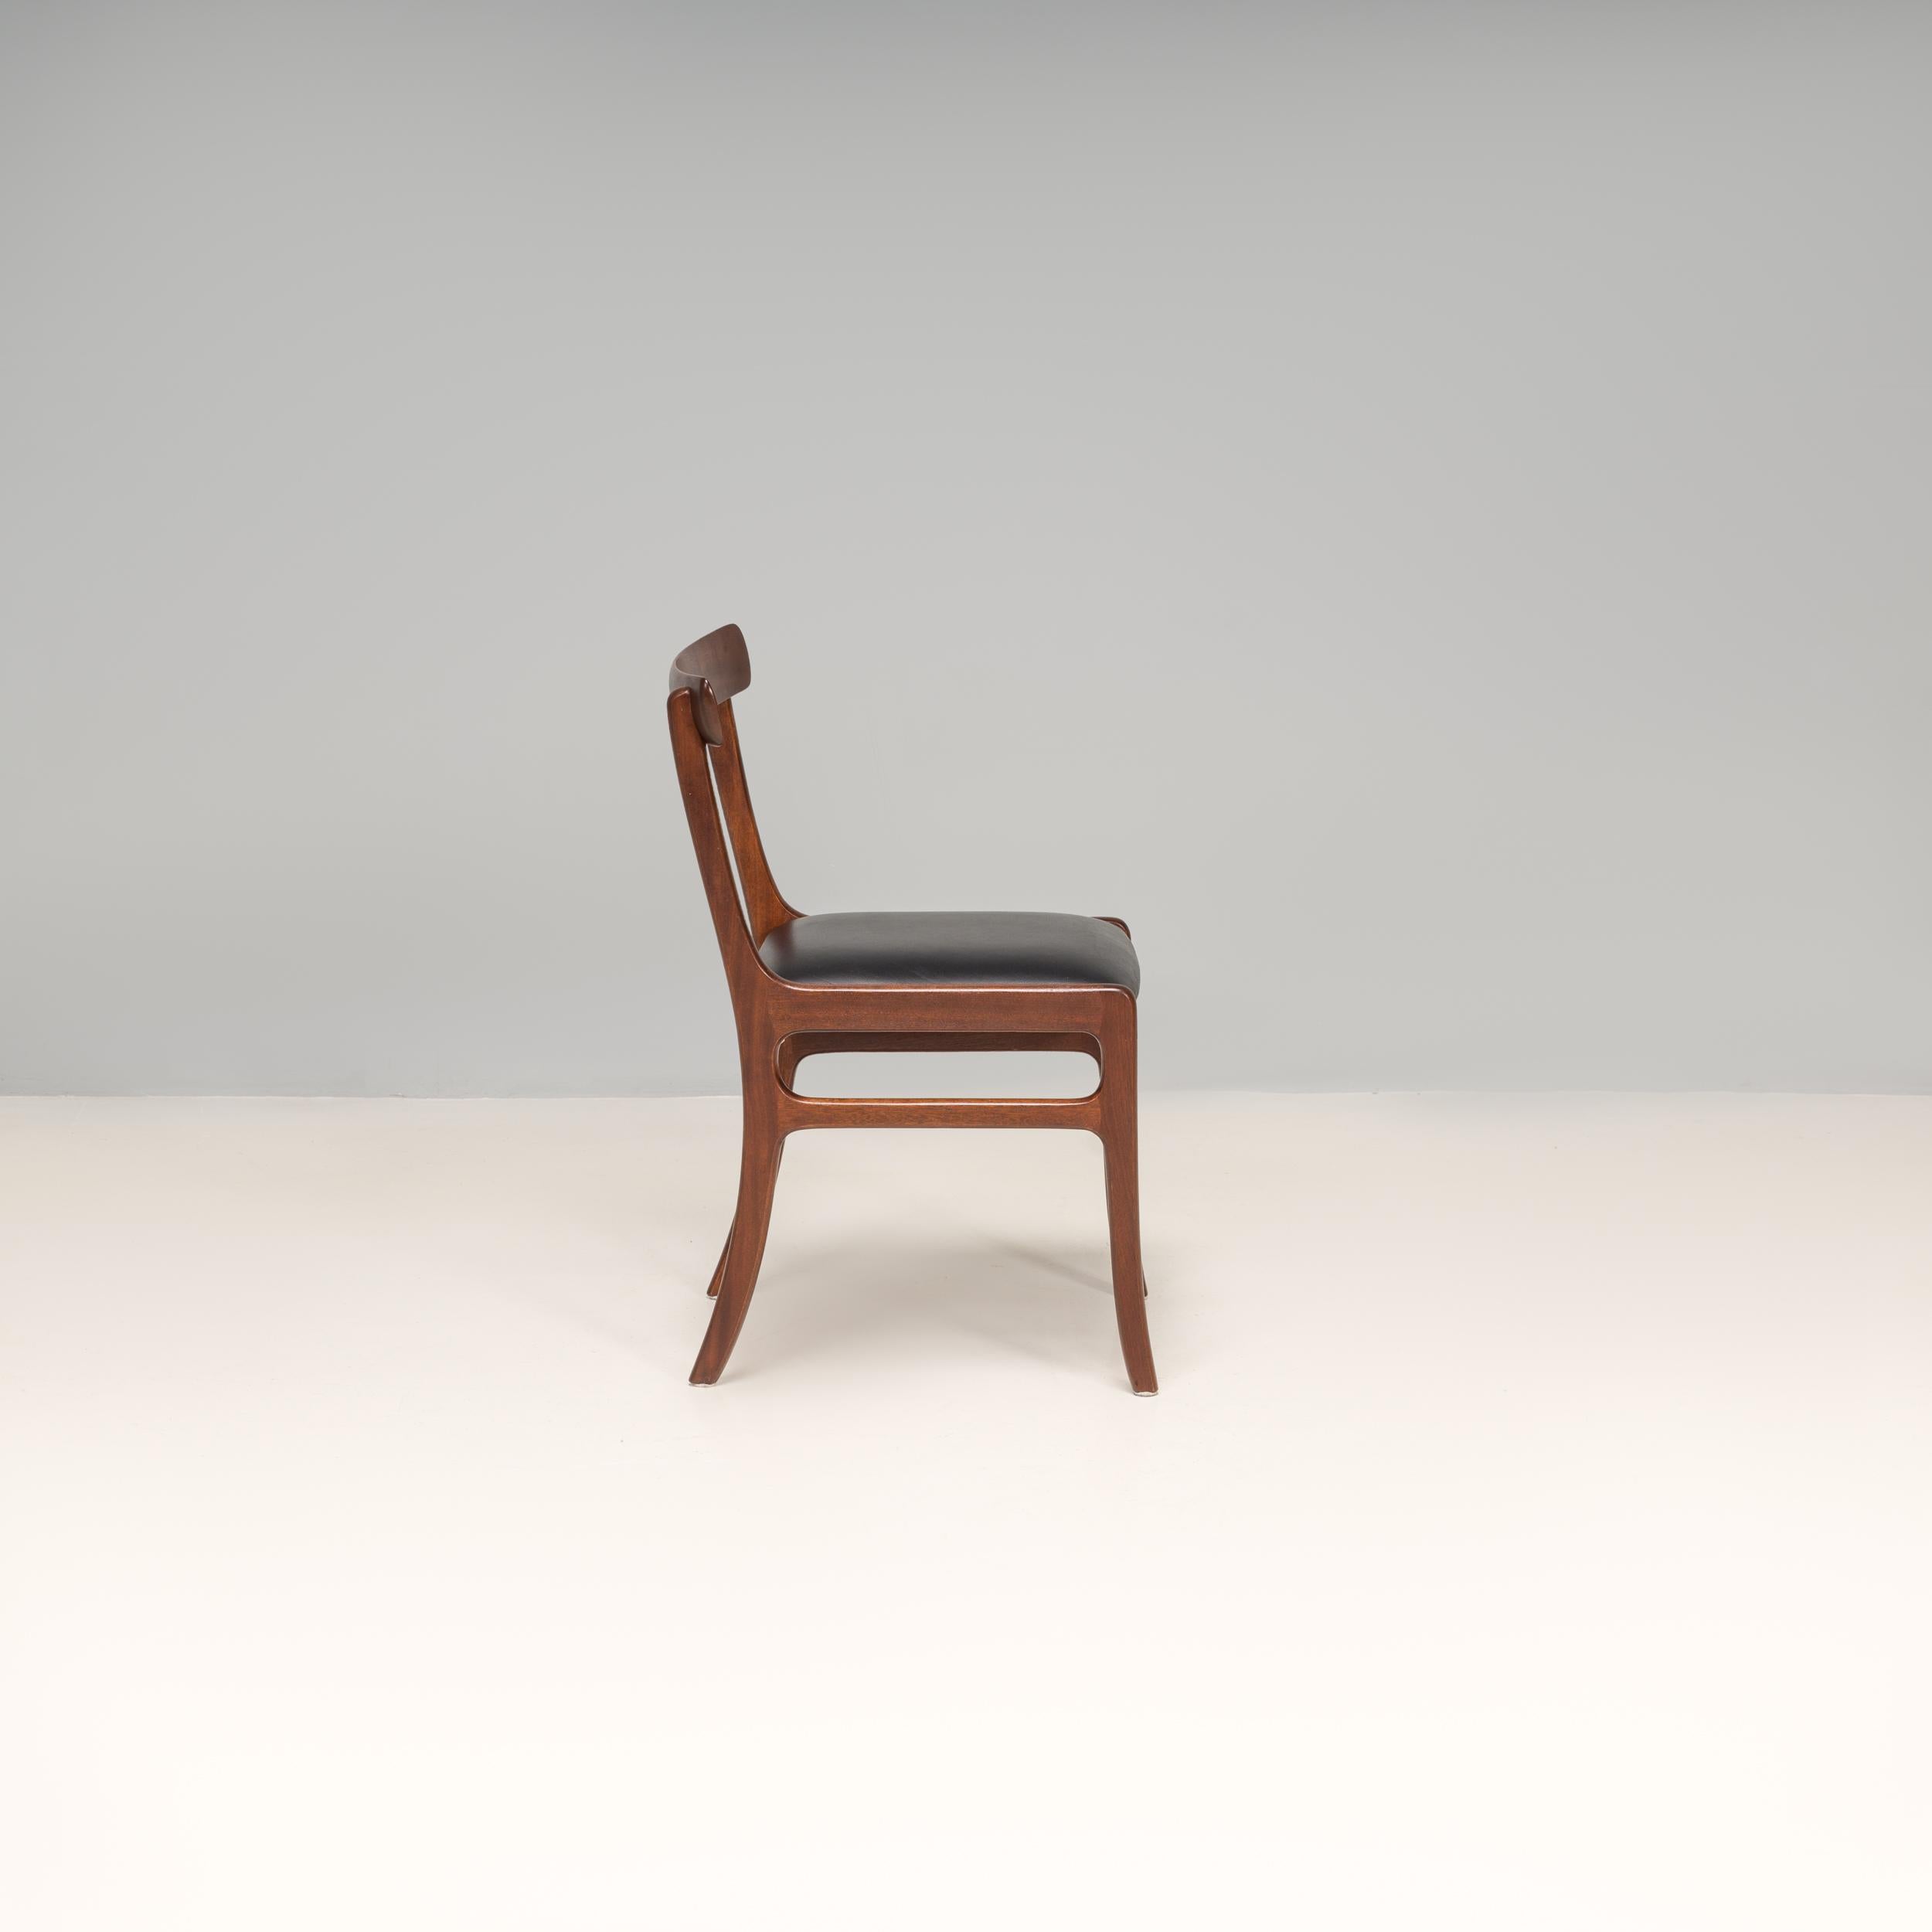 Mahogany Danish Ole Wanscher by Poul Jeppesens Rungstedlund Black Dining Chairs, Set of 6 For Sale